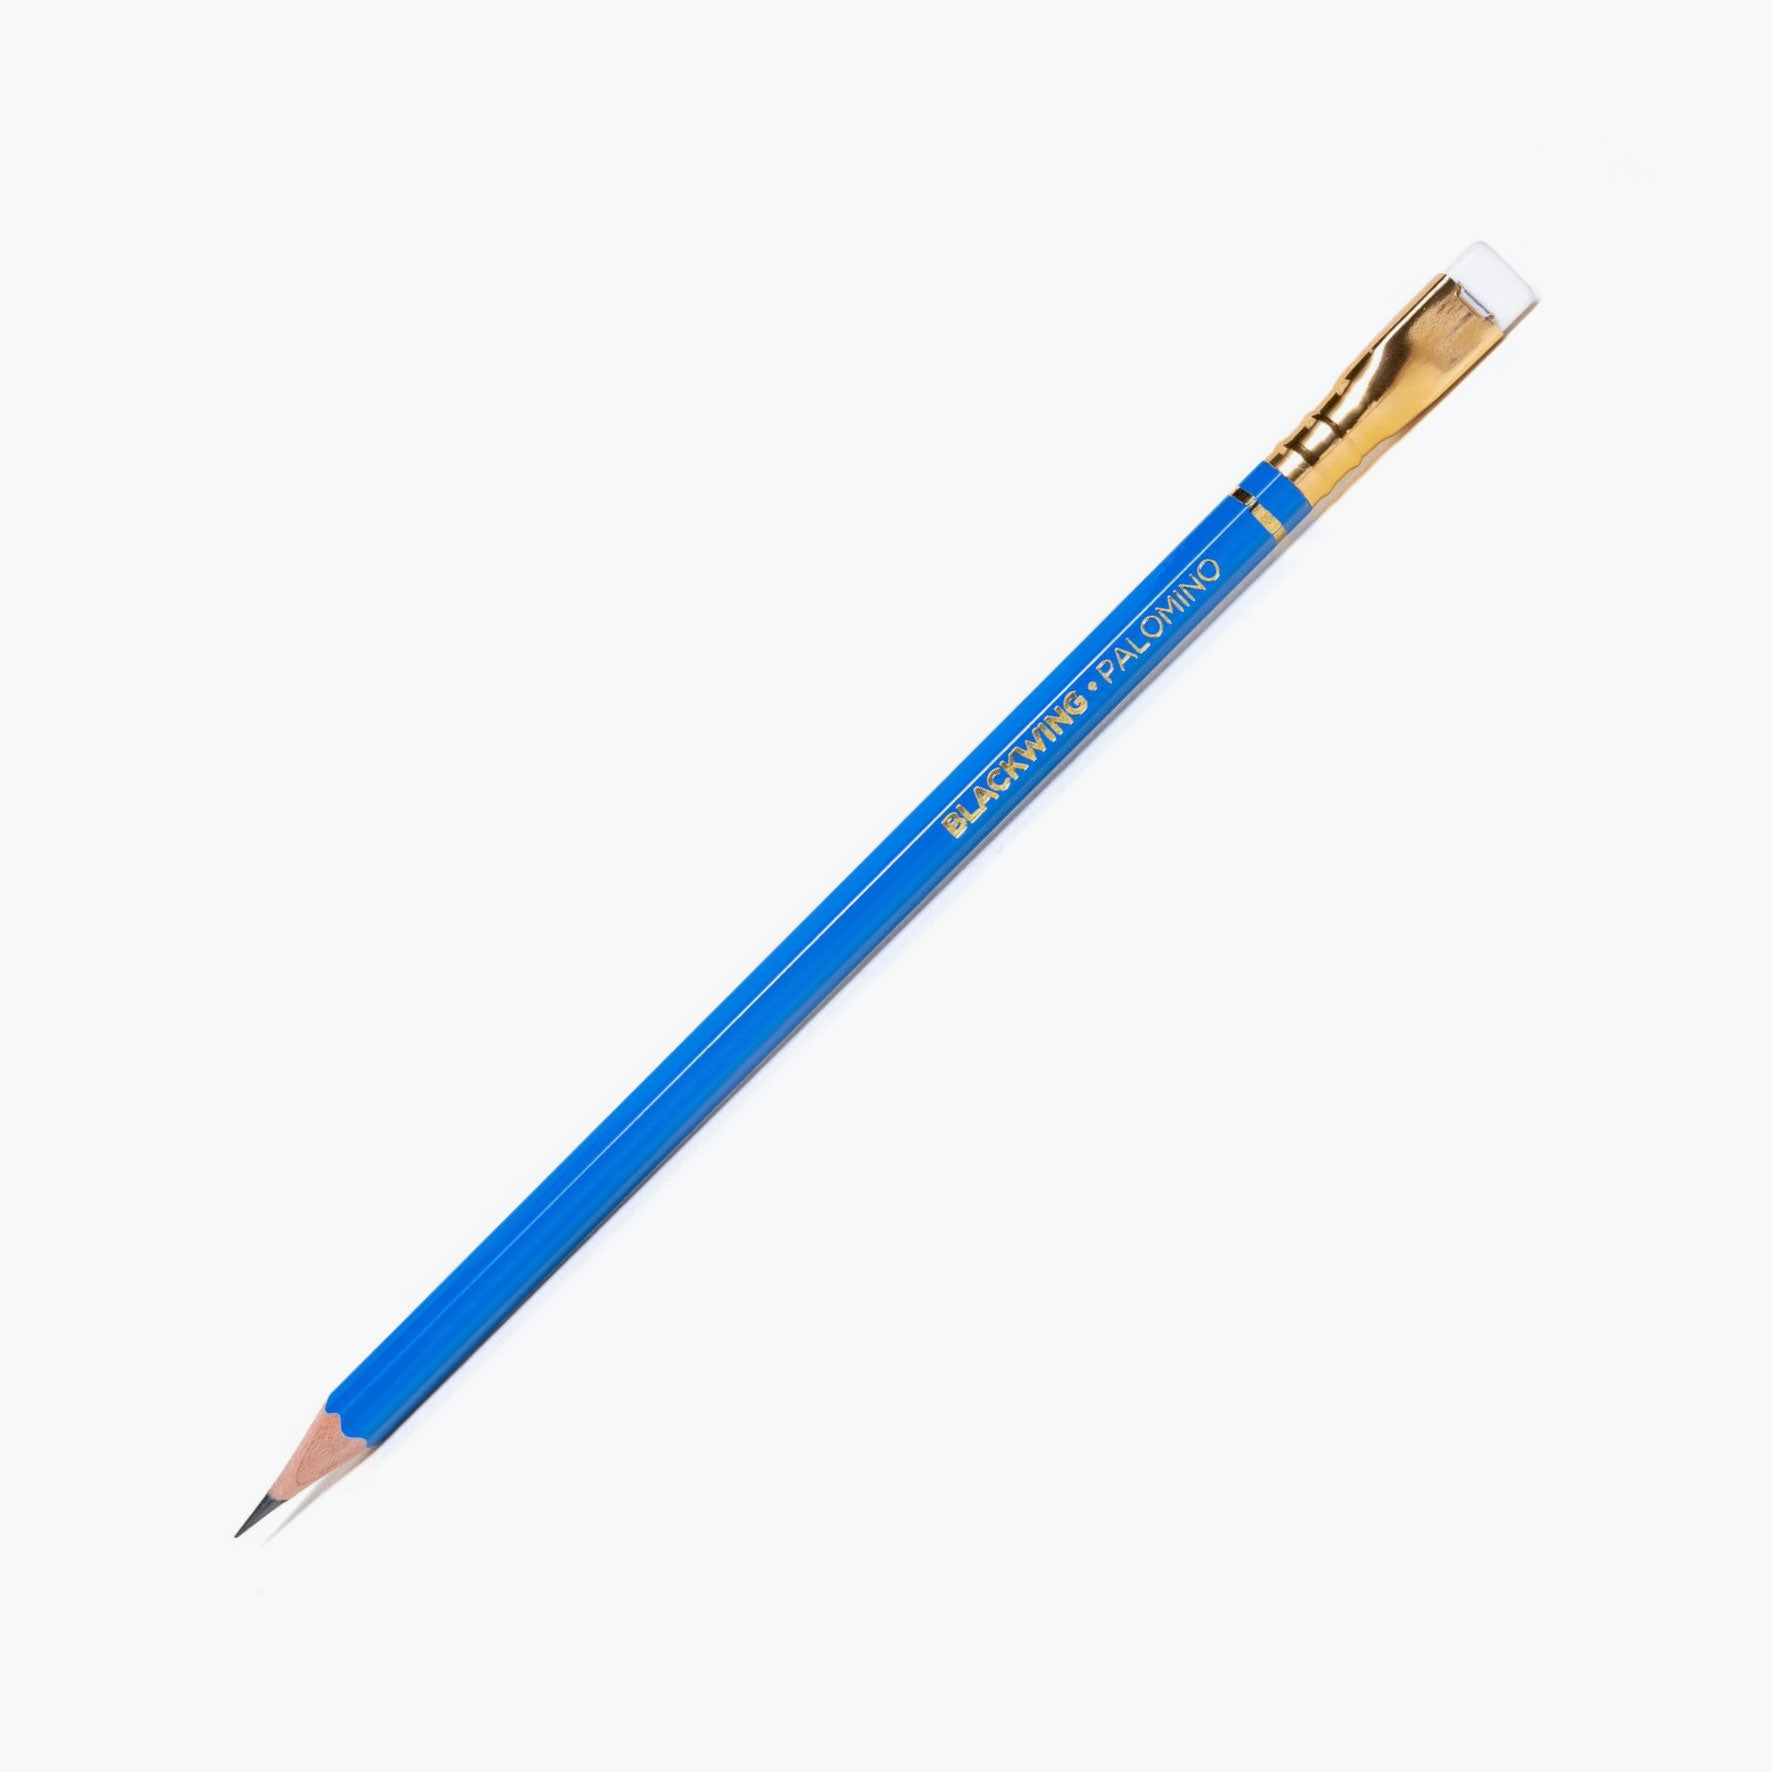 Palomino Blackwing - Pencil - Blackwing Eras 2 - Blue - Pack of 2 (Limited Edition)